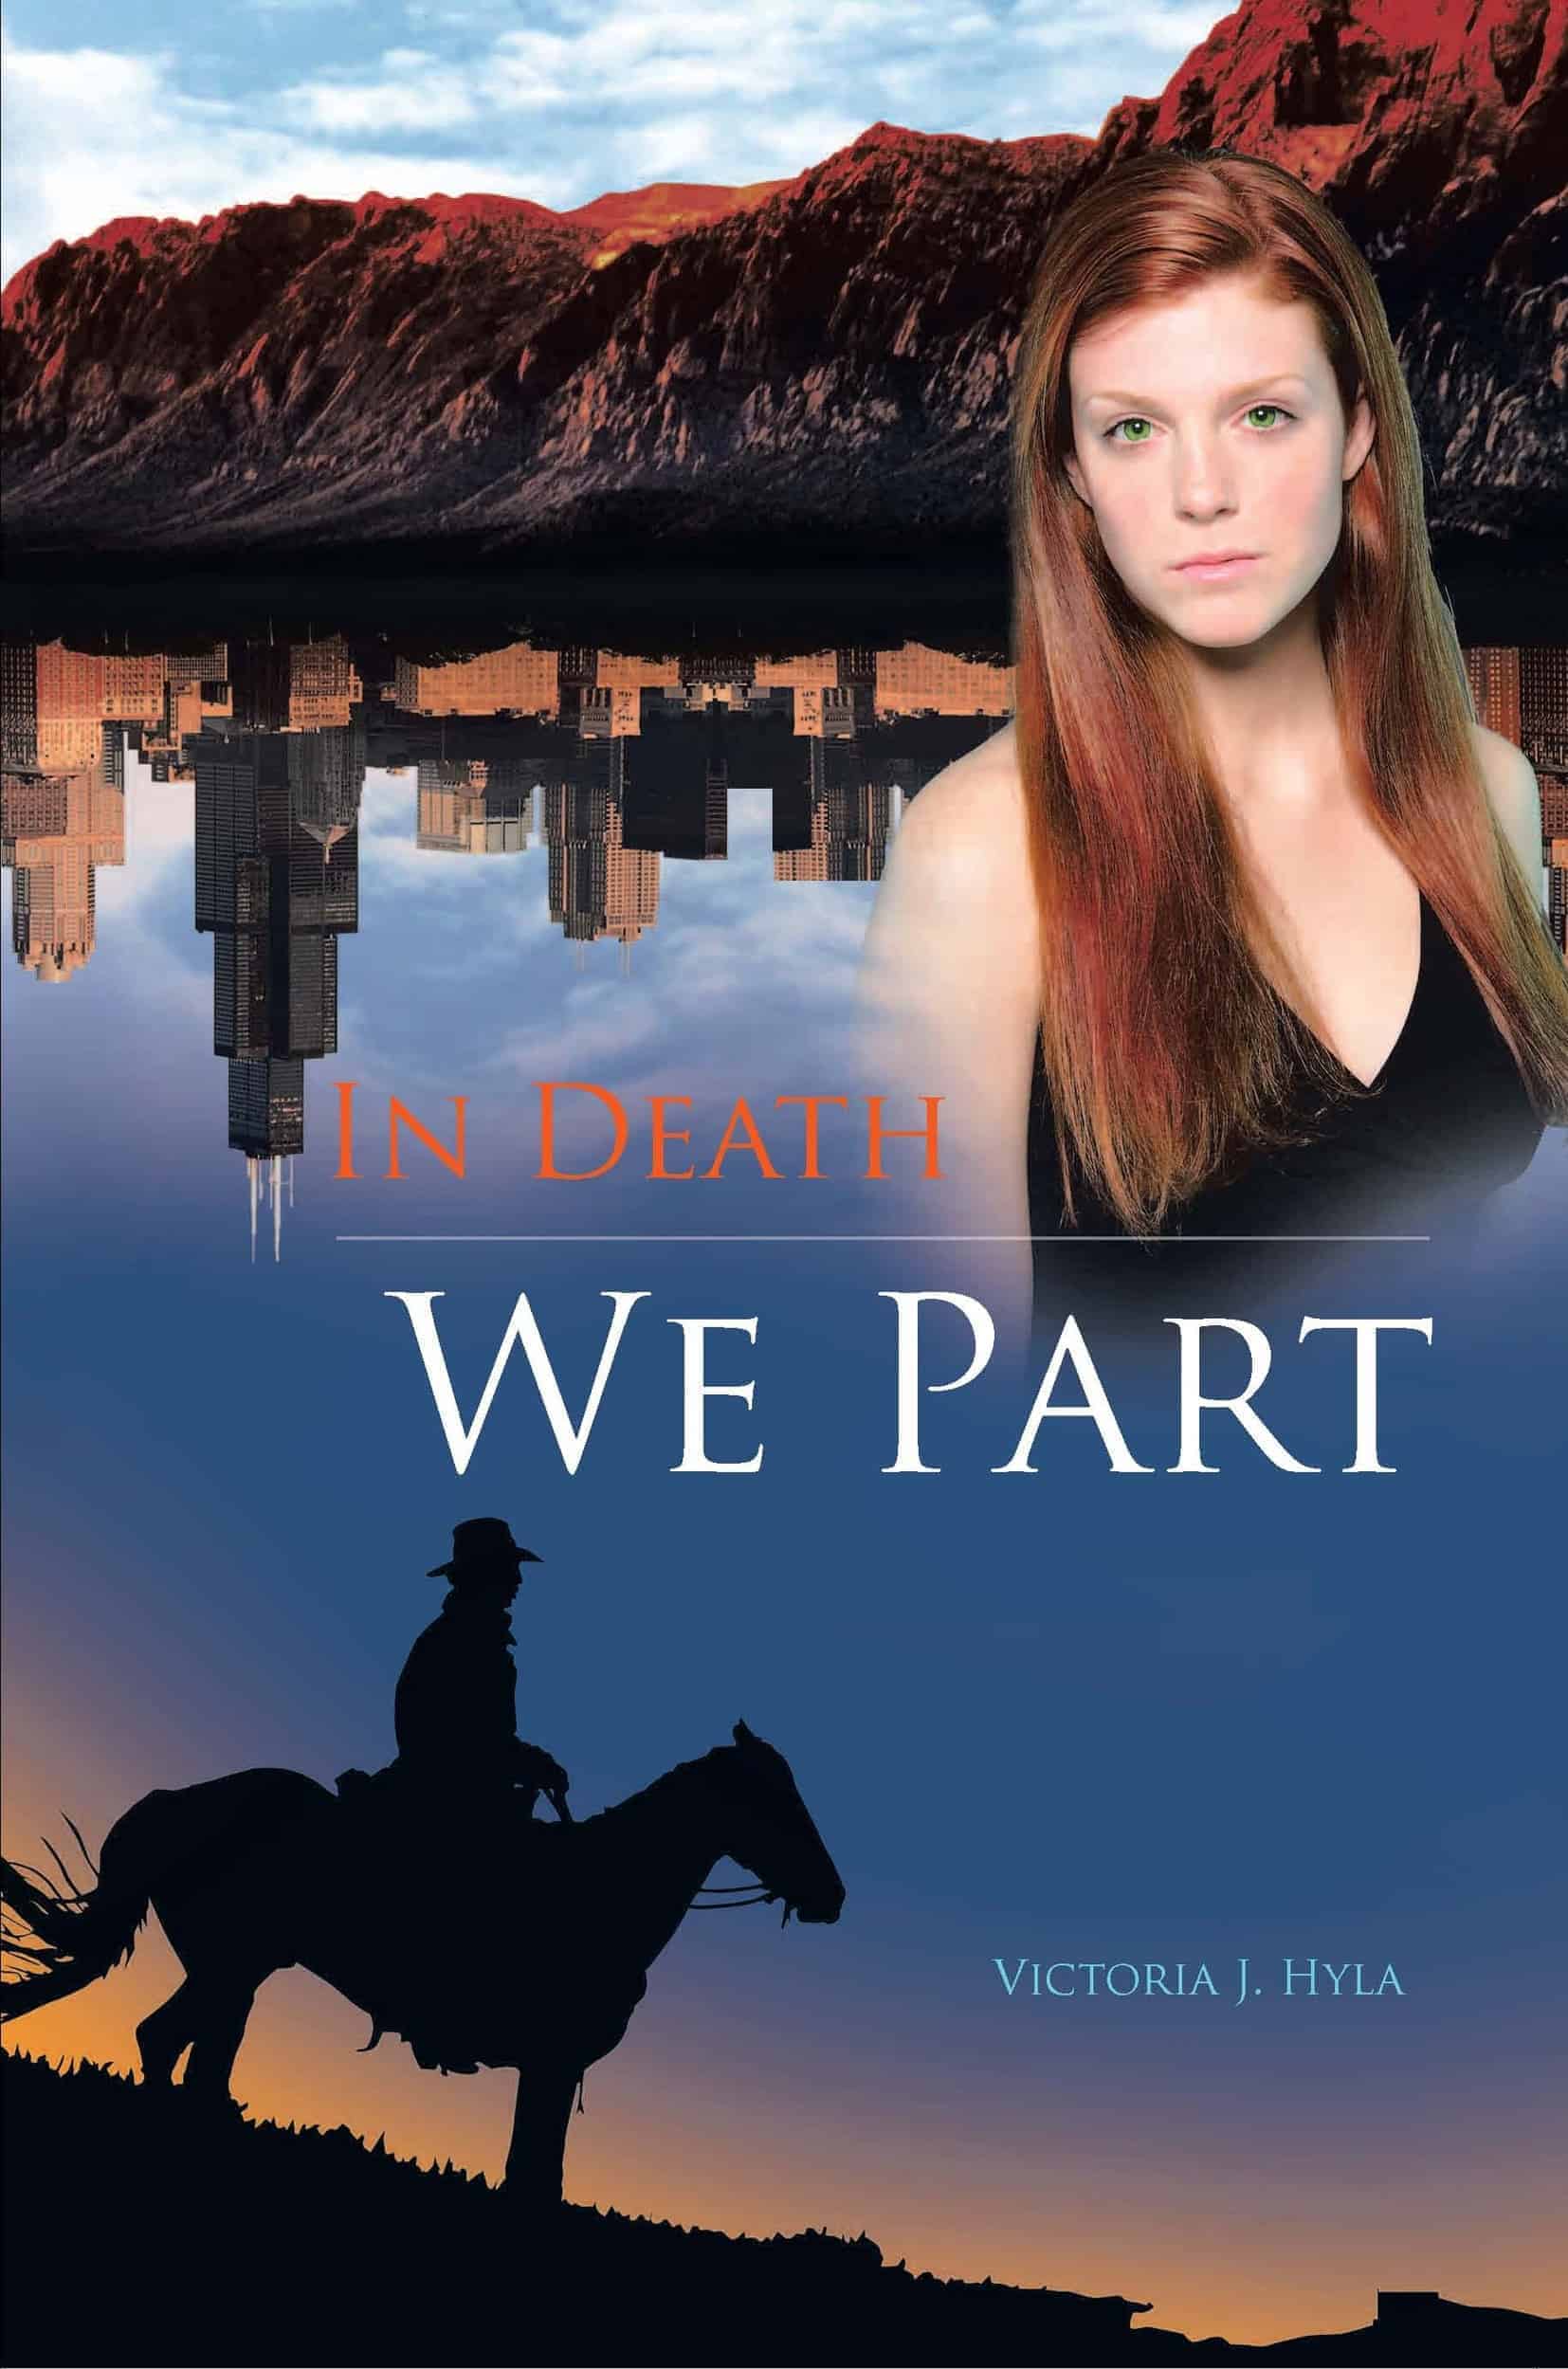 This In Death We Part (PDF) is made with love by Victoria J. Hyla (Author)/Victorious Editing Services! Shop more unique gift ideas today with Spots Initiatives, the best way to support creators.